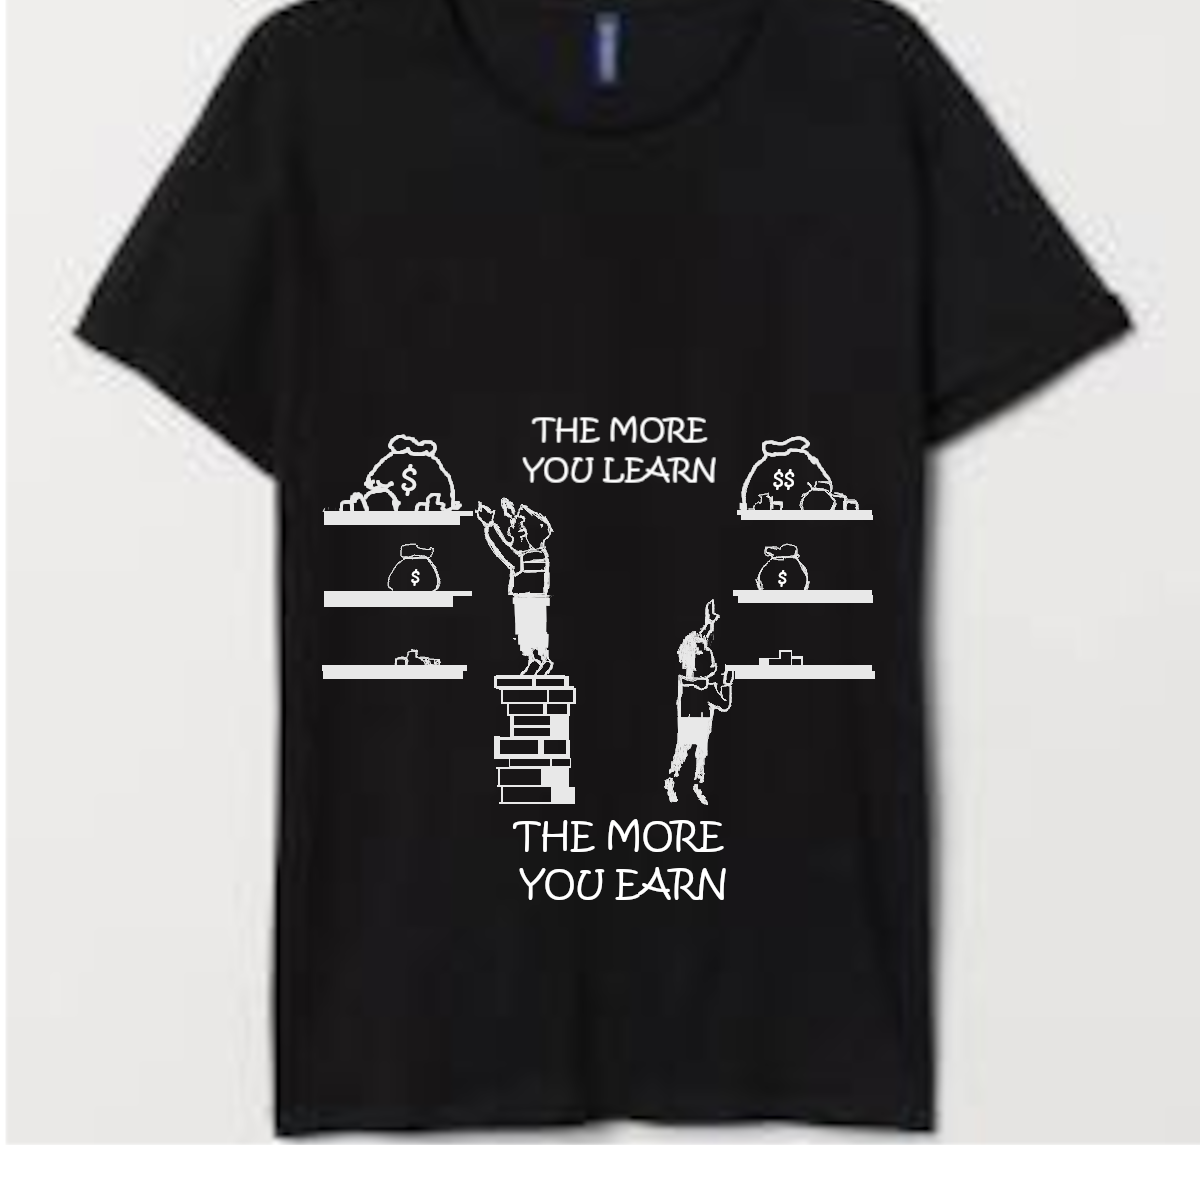 gimp design t-shirt the more YOU EARN you learn